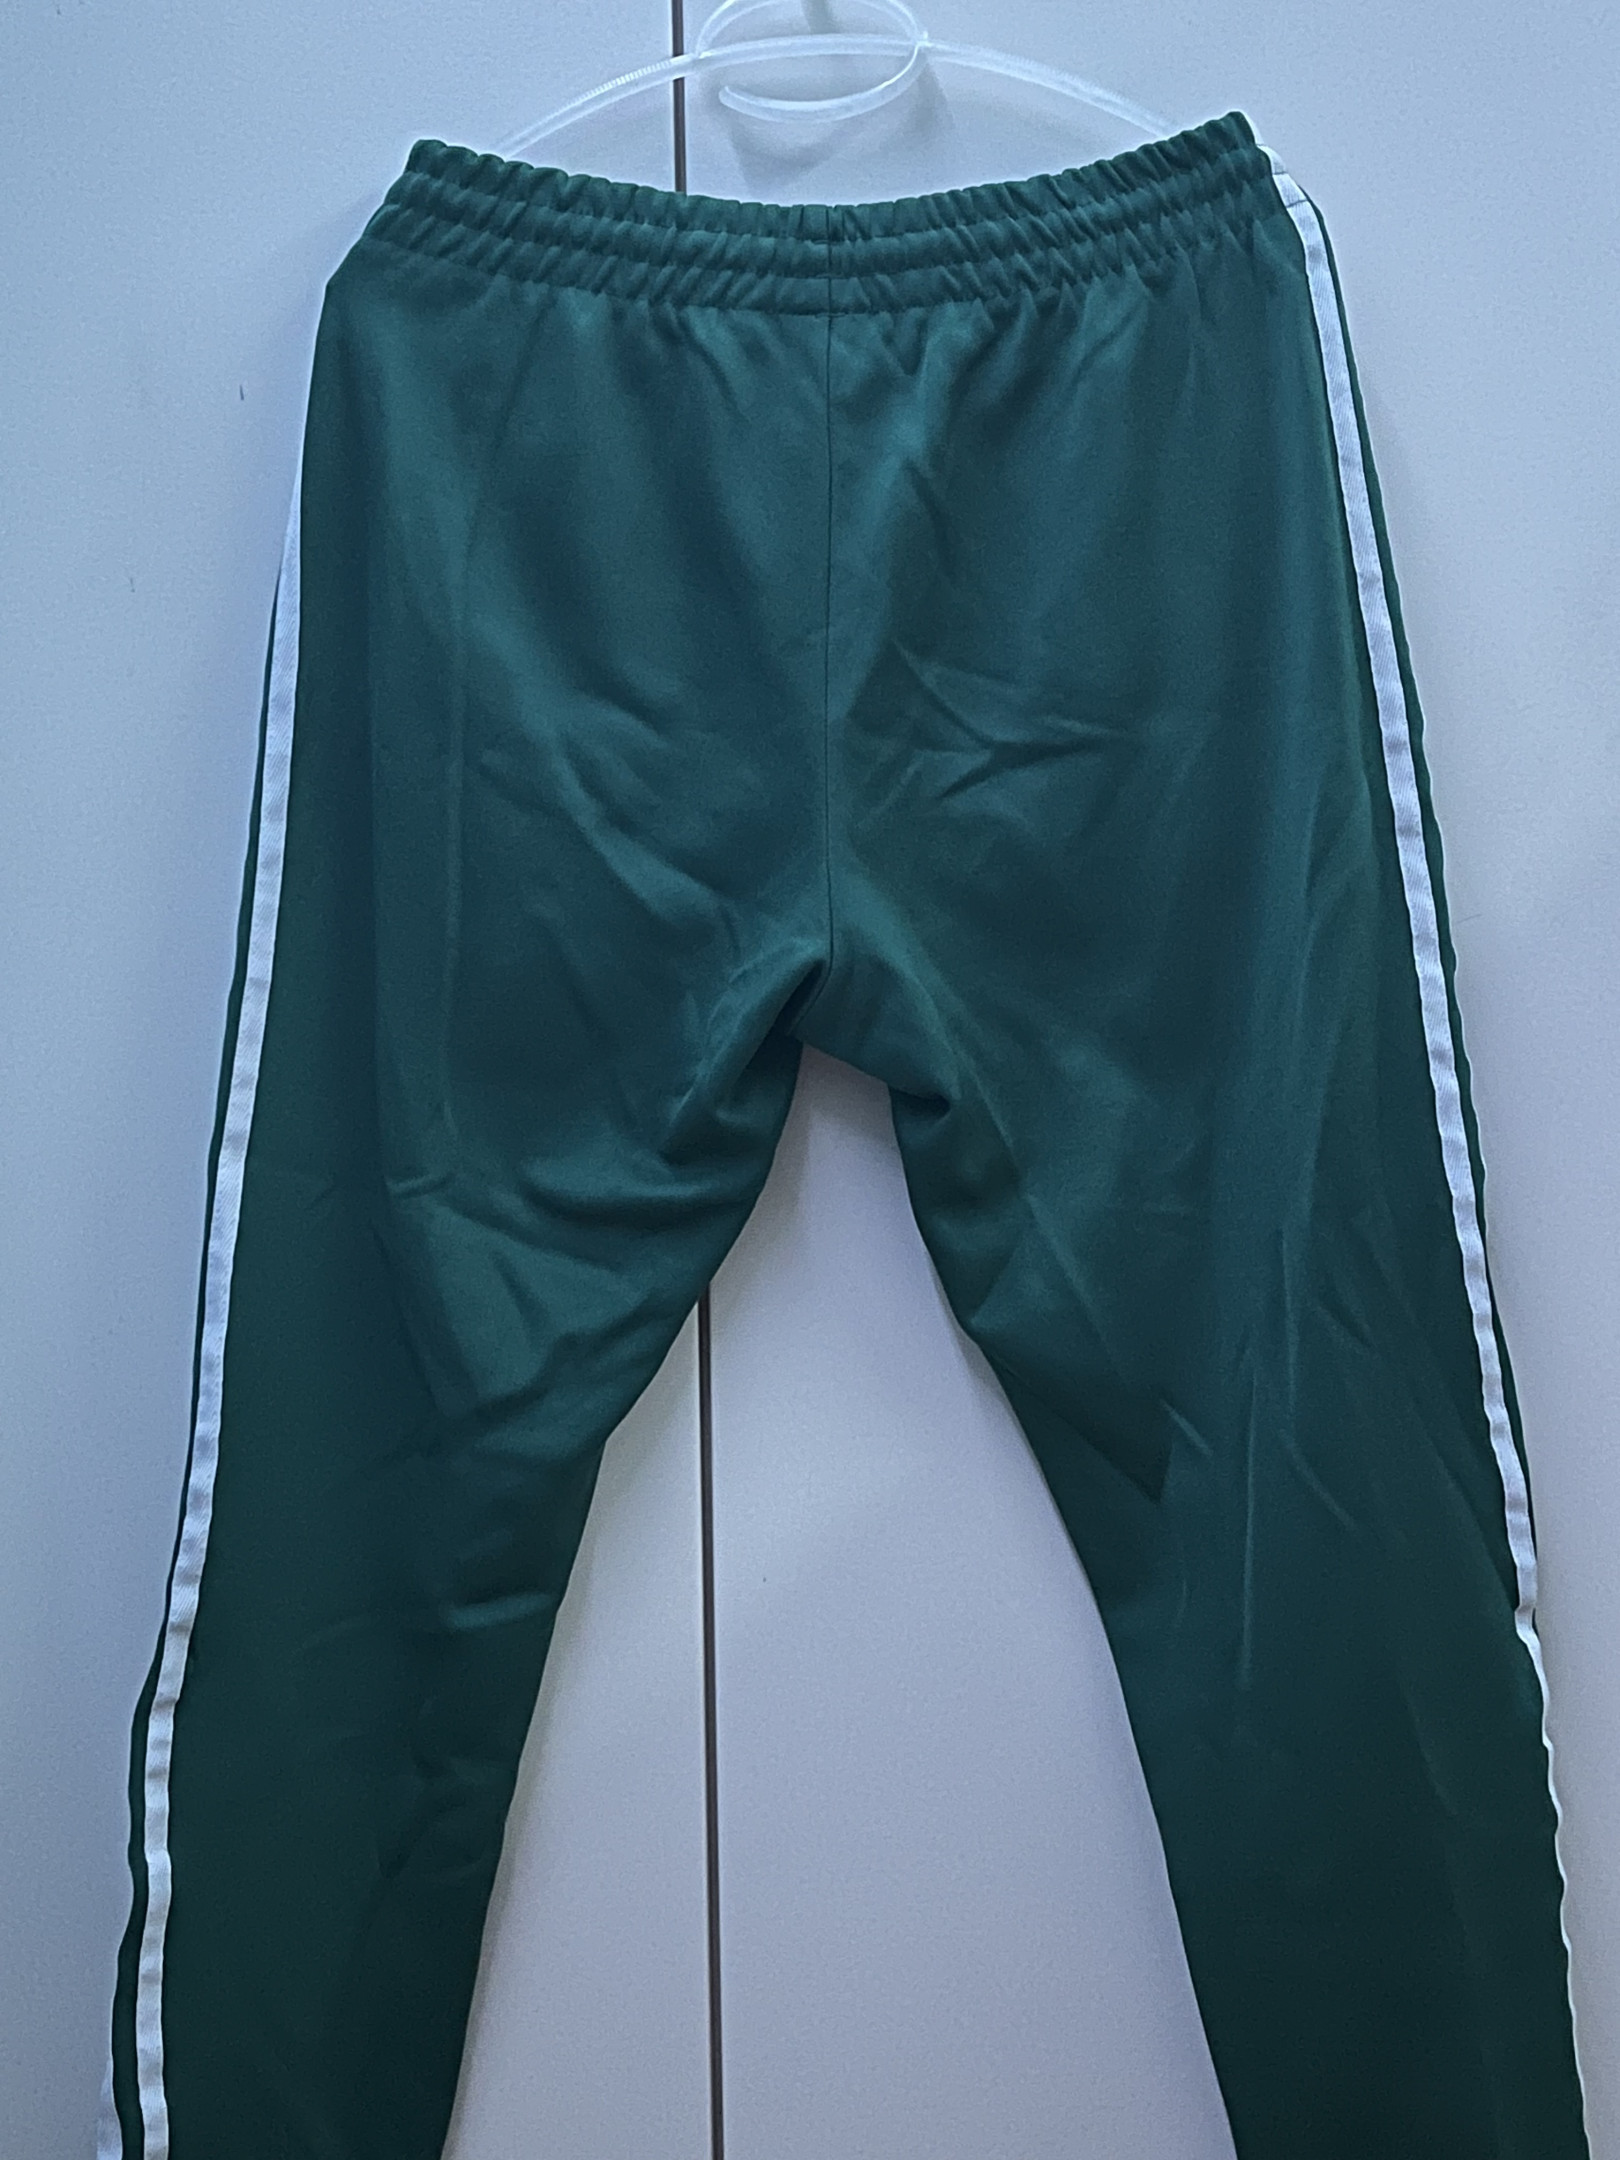 Adidas green and grey jogging suit